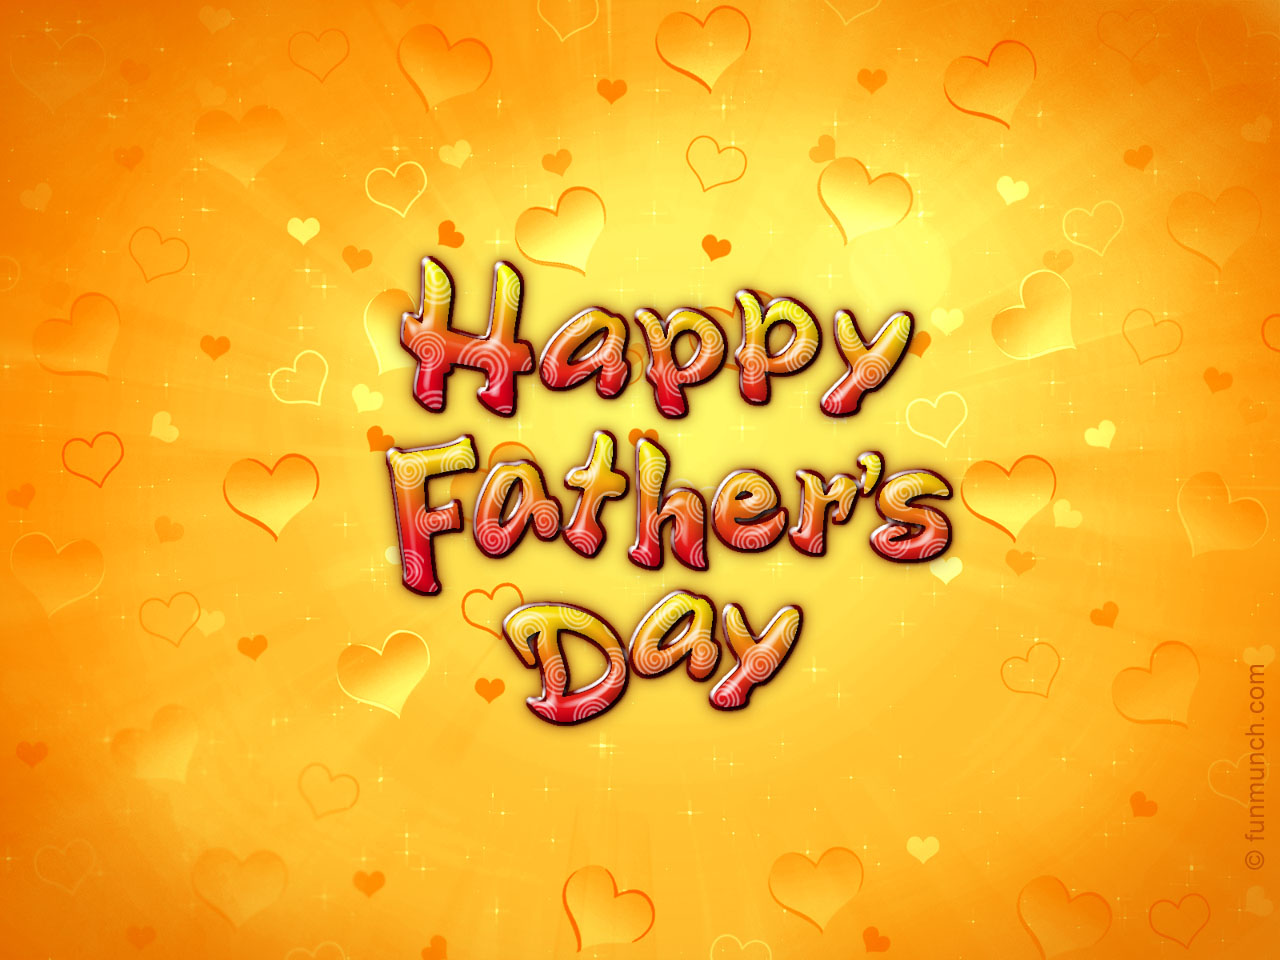 [fathers_day_wallpaper_2.jpg]